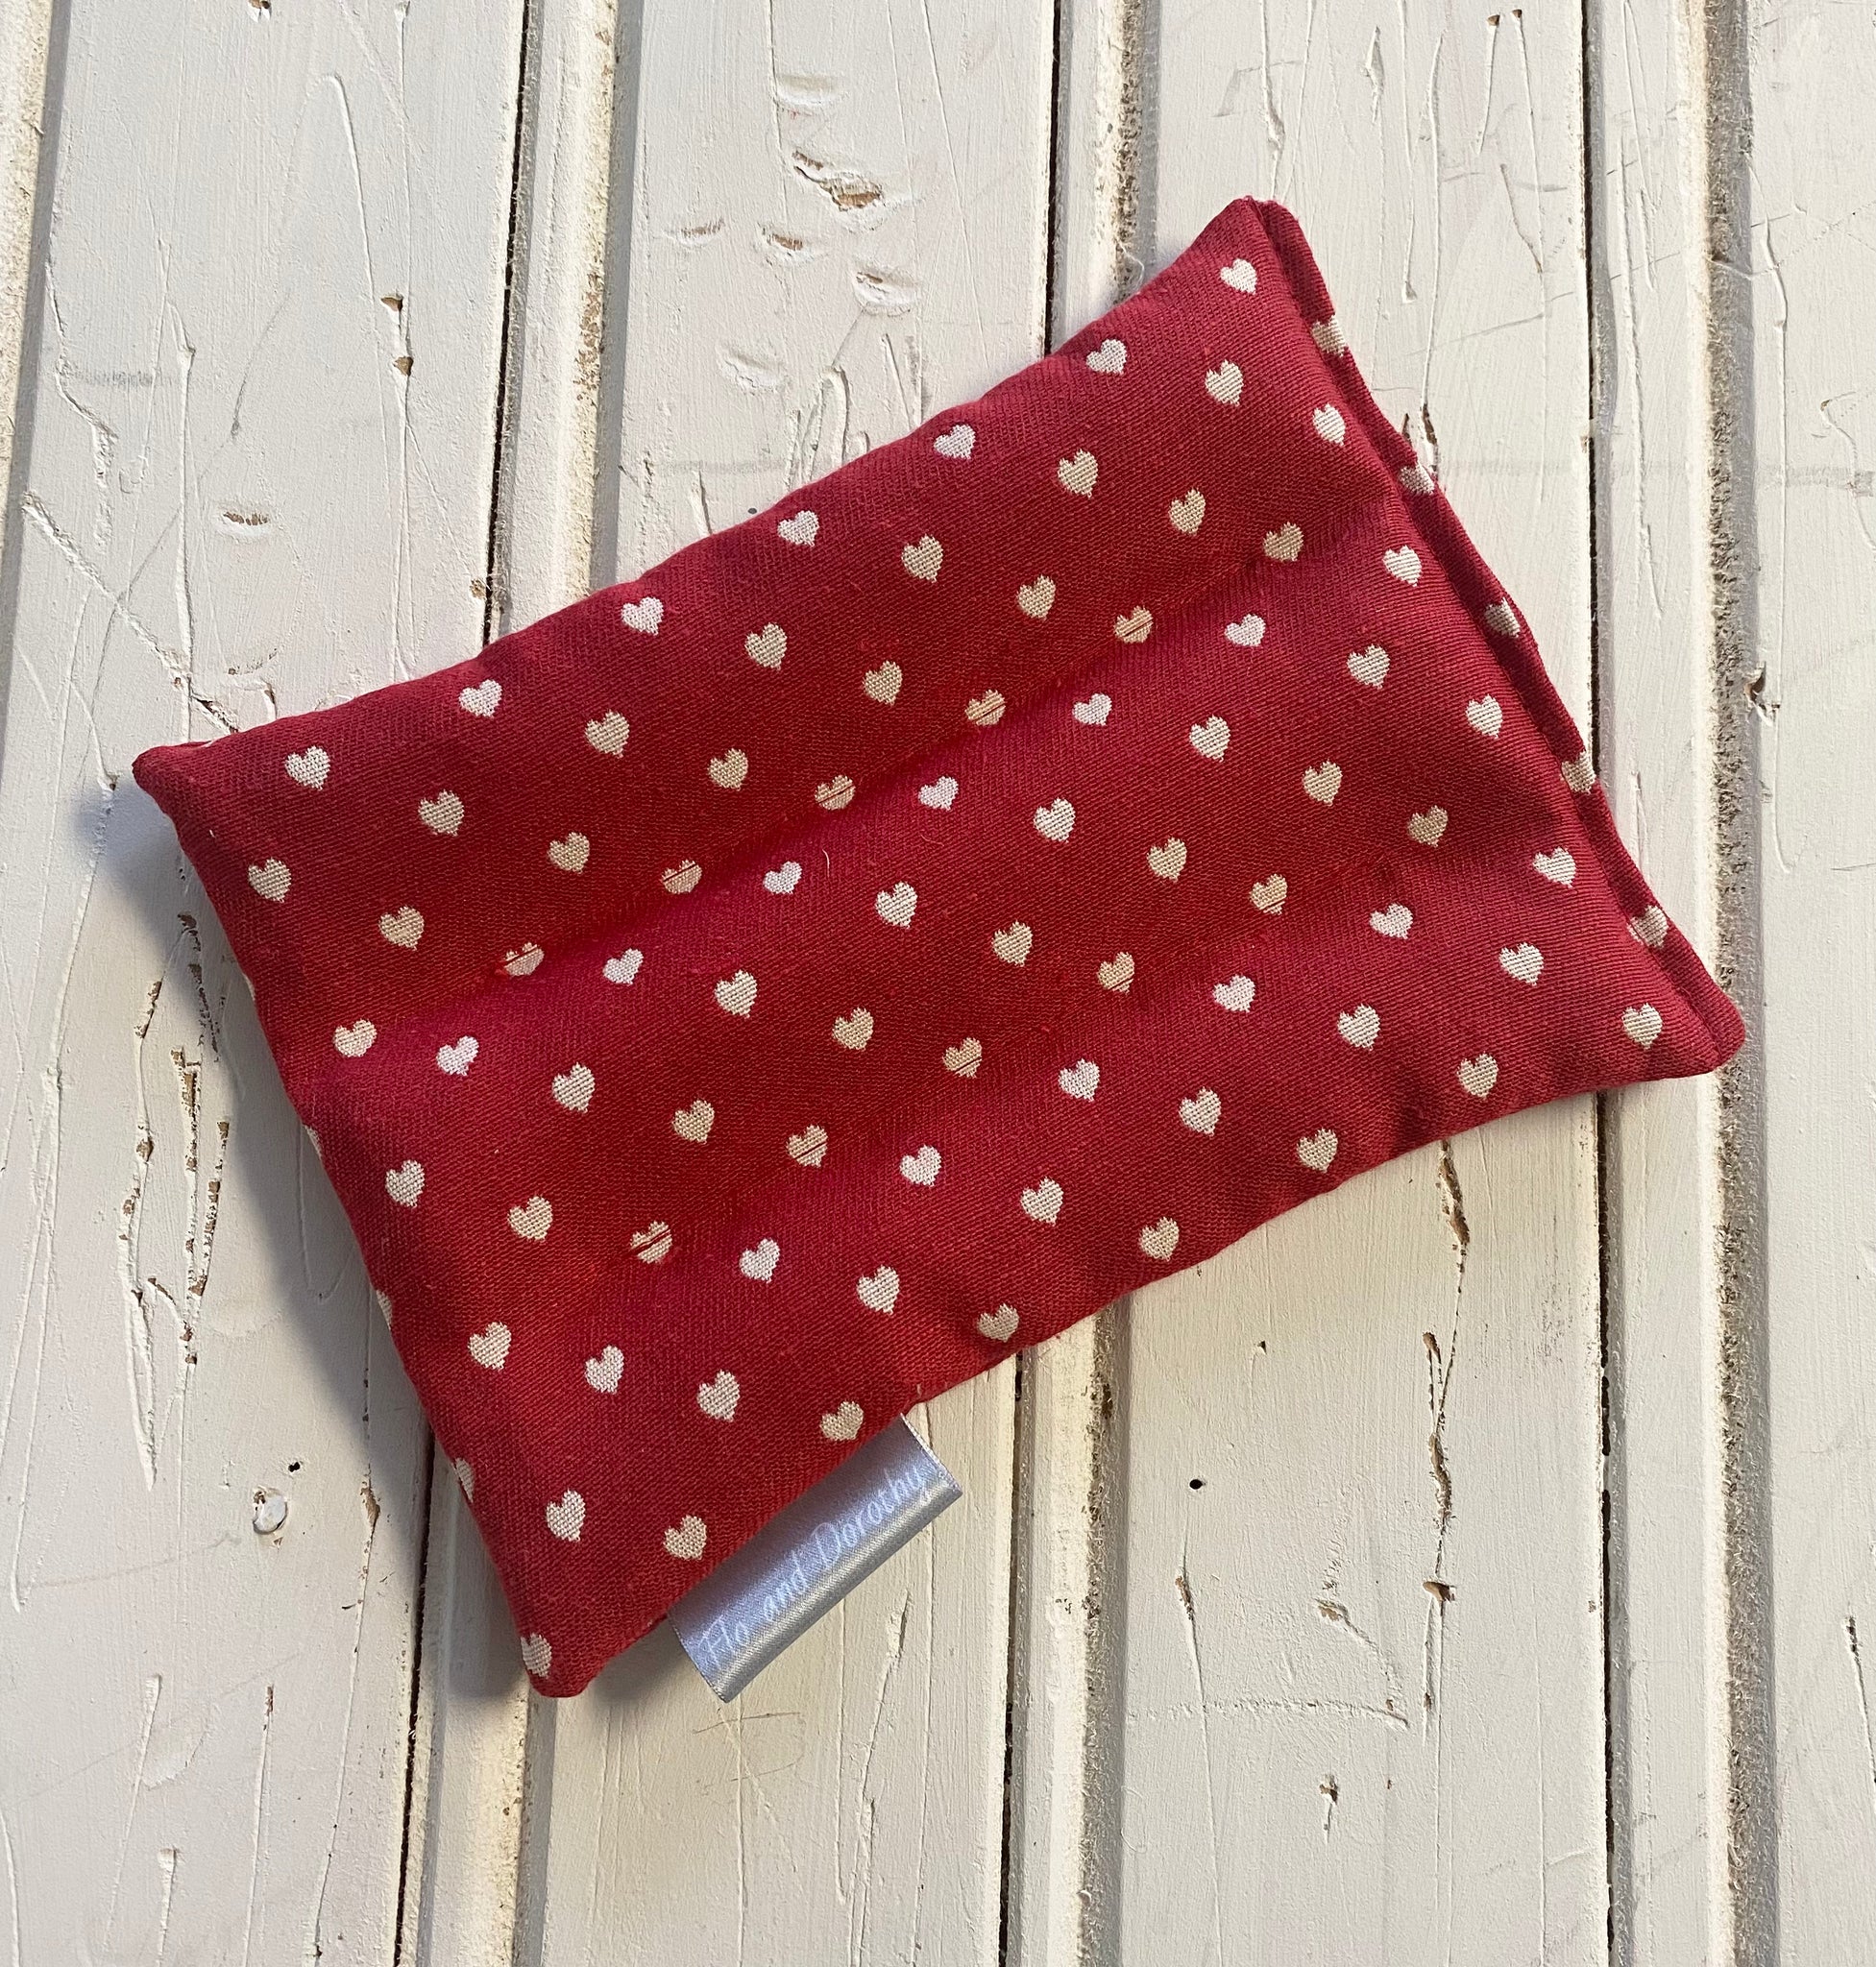 Wheat Bag in Red and White Heart Print Fabric